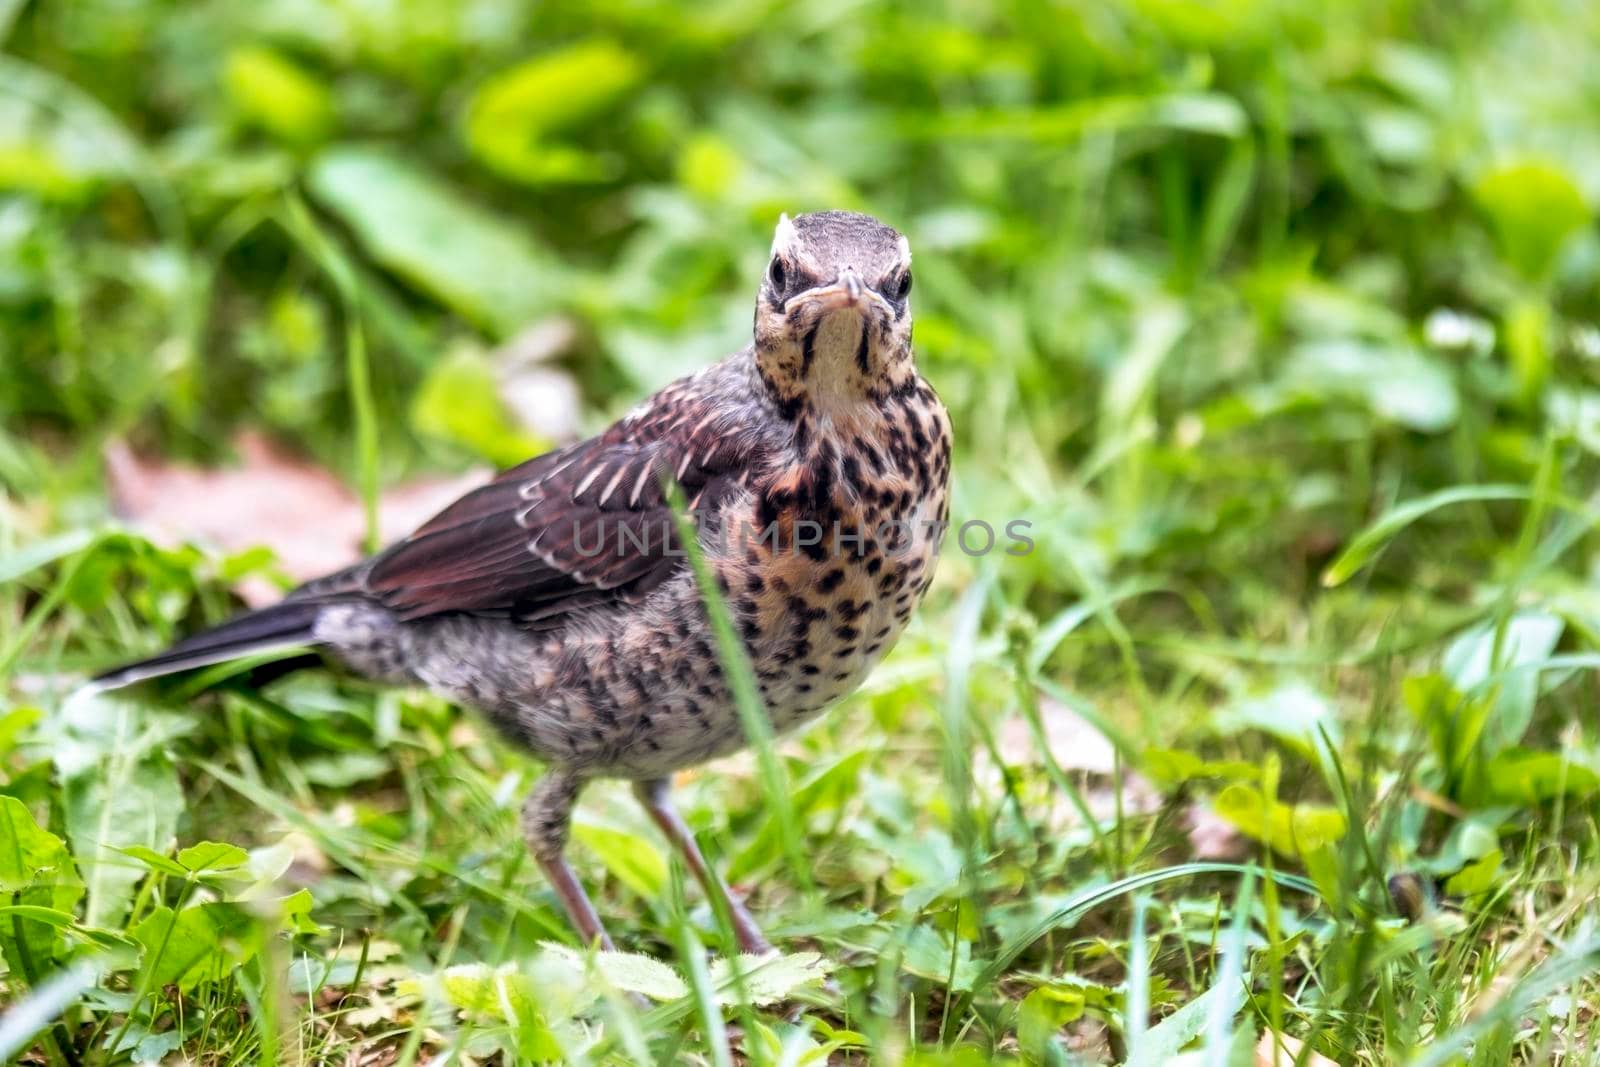 Young thrush on green grass close-up.